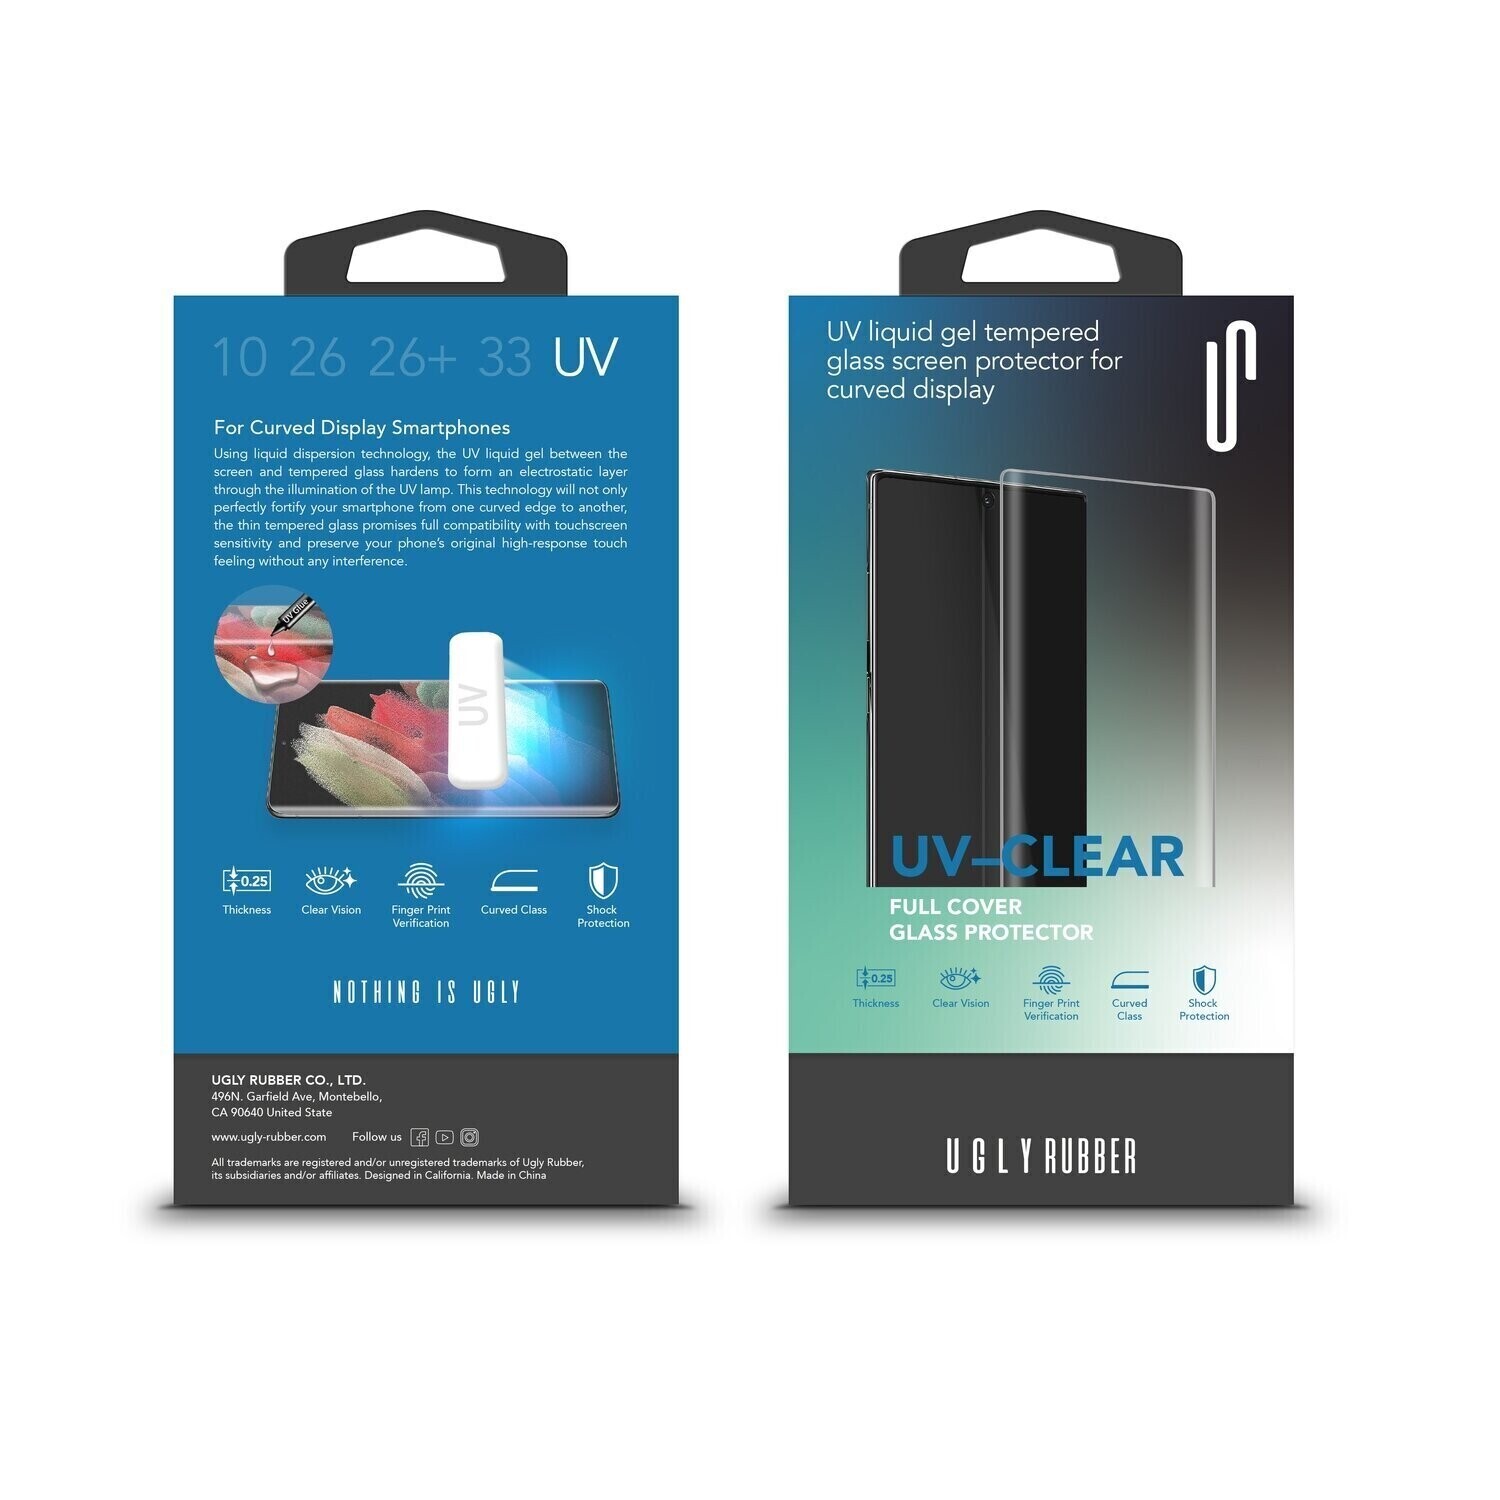 Ugly Rubber Xiaomi 10 UV Liquid Gel Tempered Glass, Clear